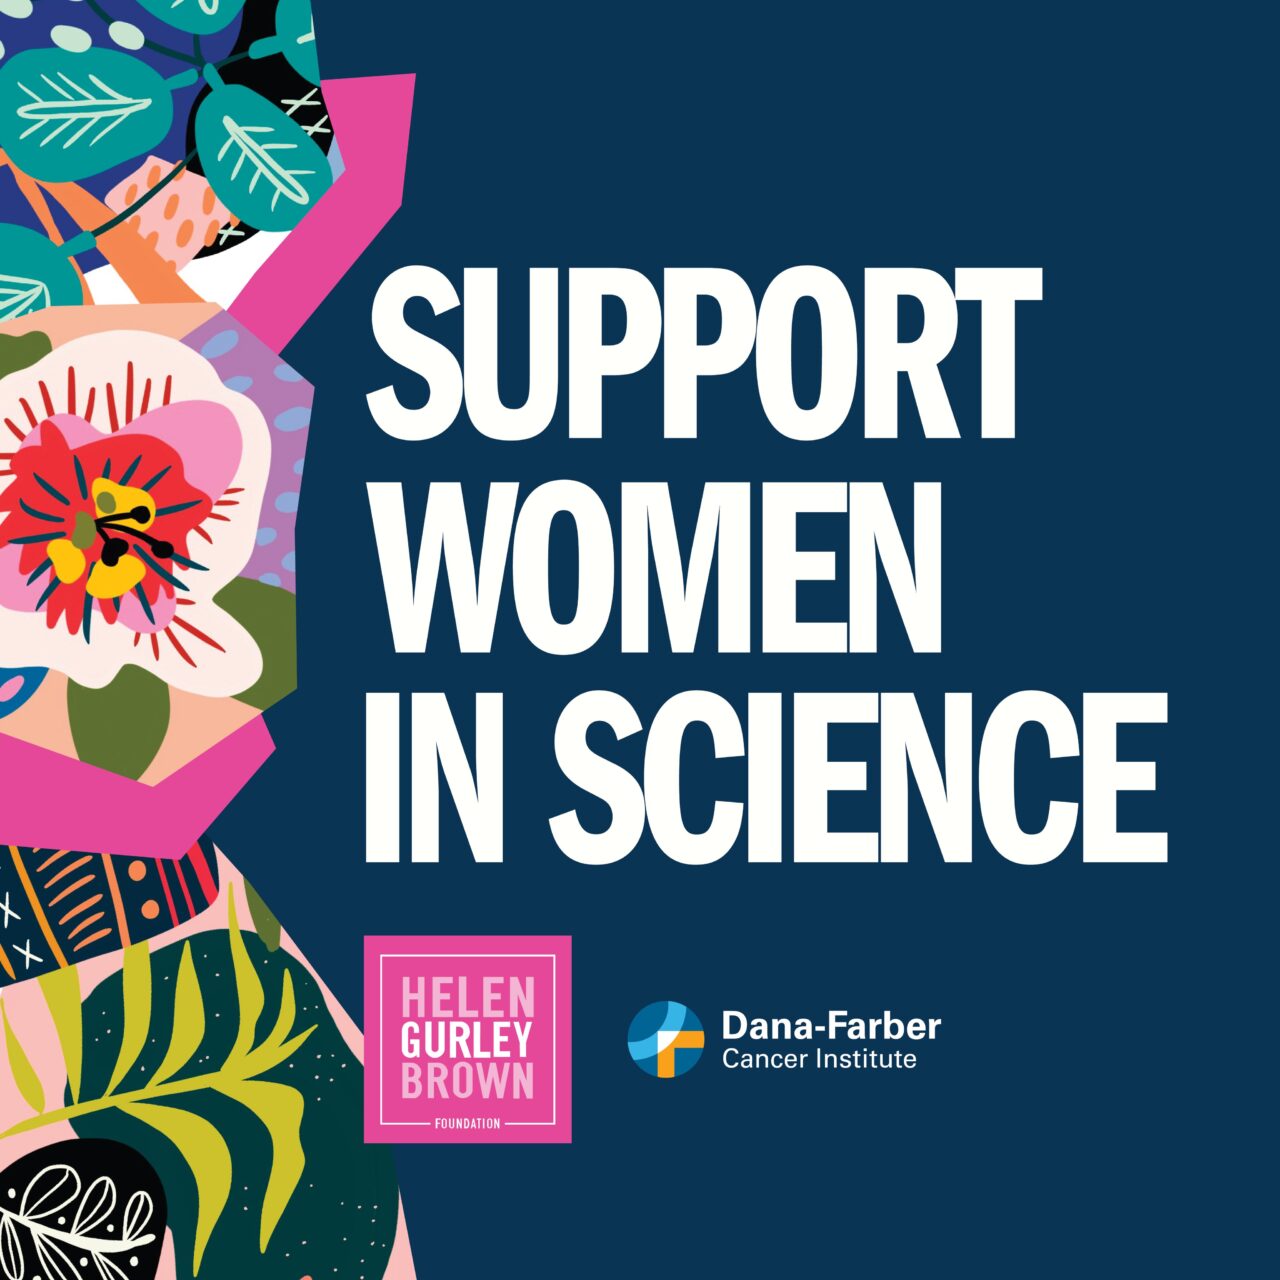 Don’t miss the Helen Gurley Brown Presidential Summit on Women and Science at Dana-Farber Cancer Institute